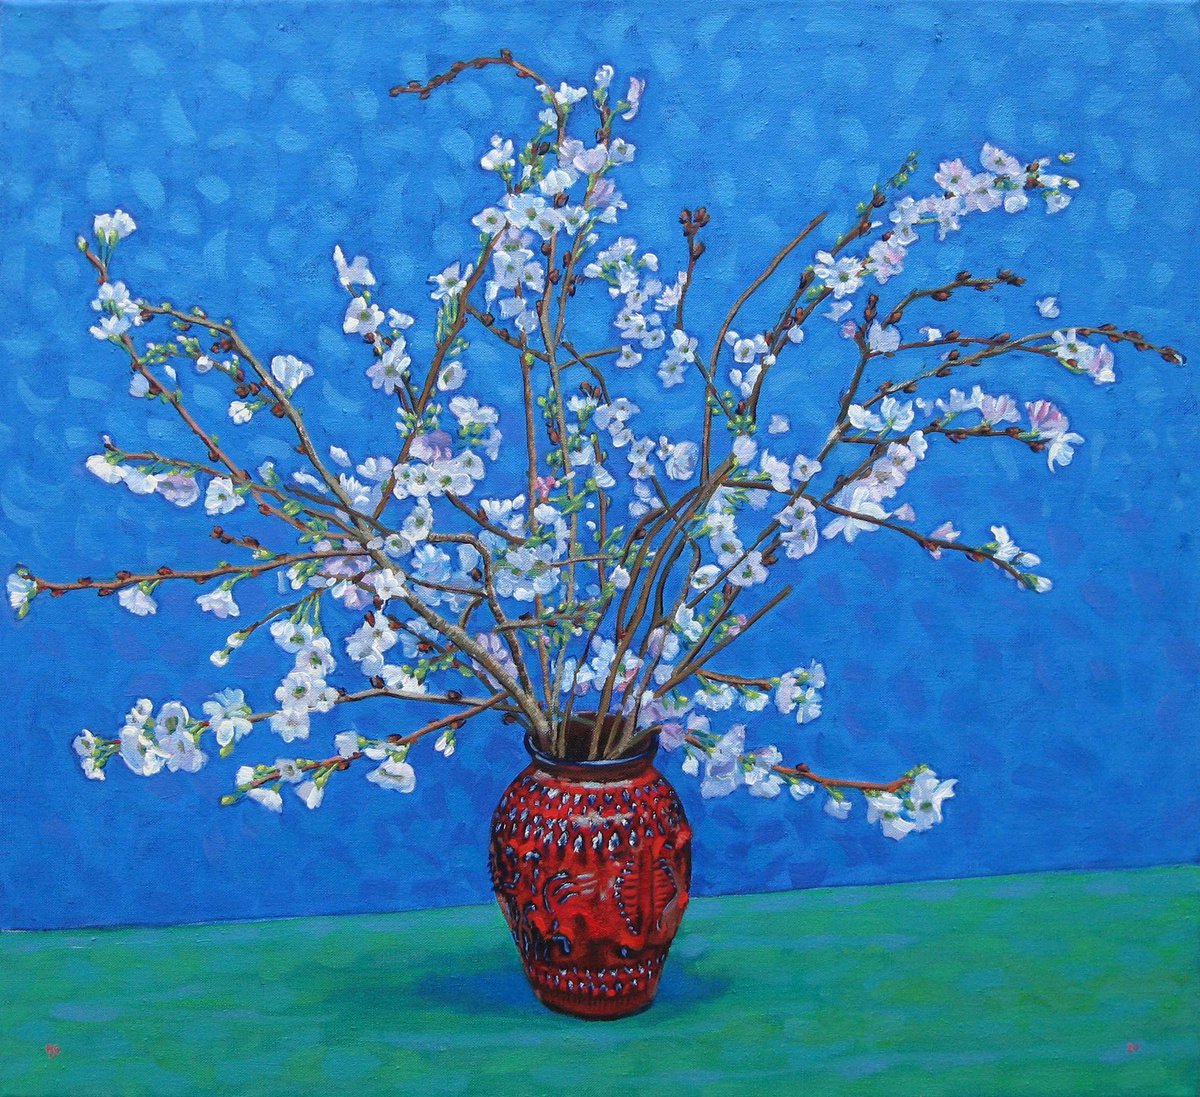 Winter Flowering Cherry on a Green Table by Richard Gibson